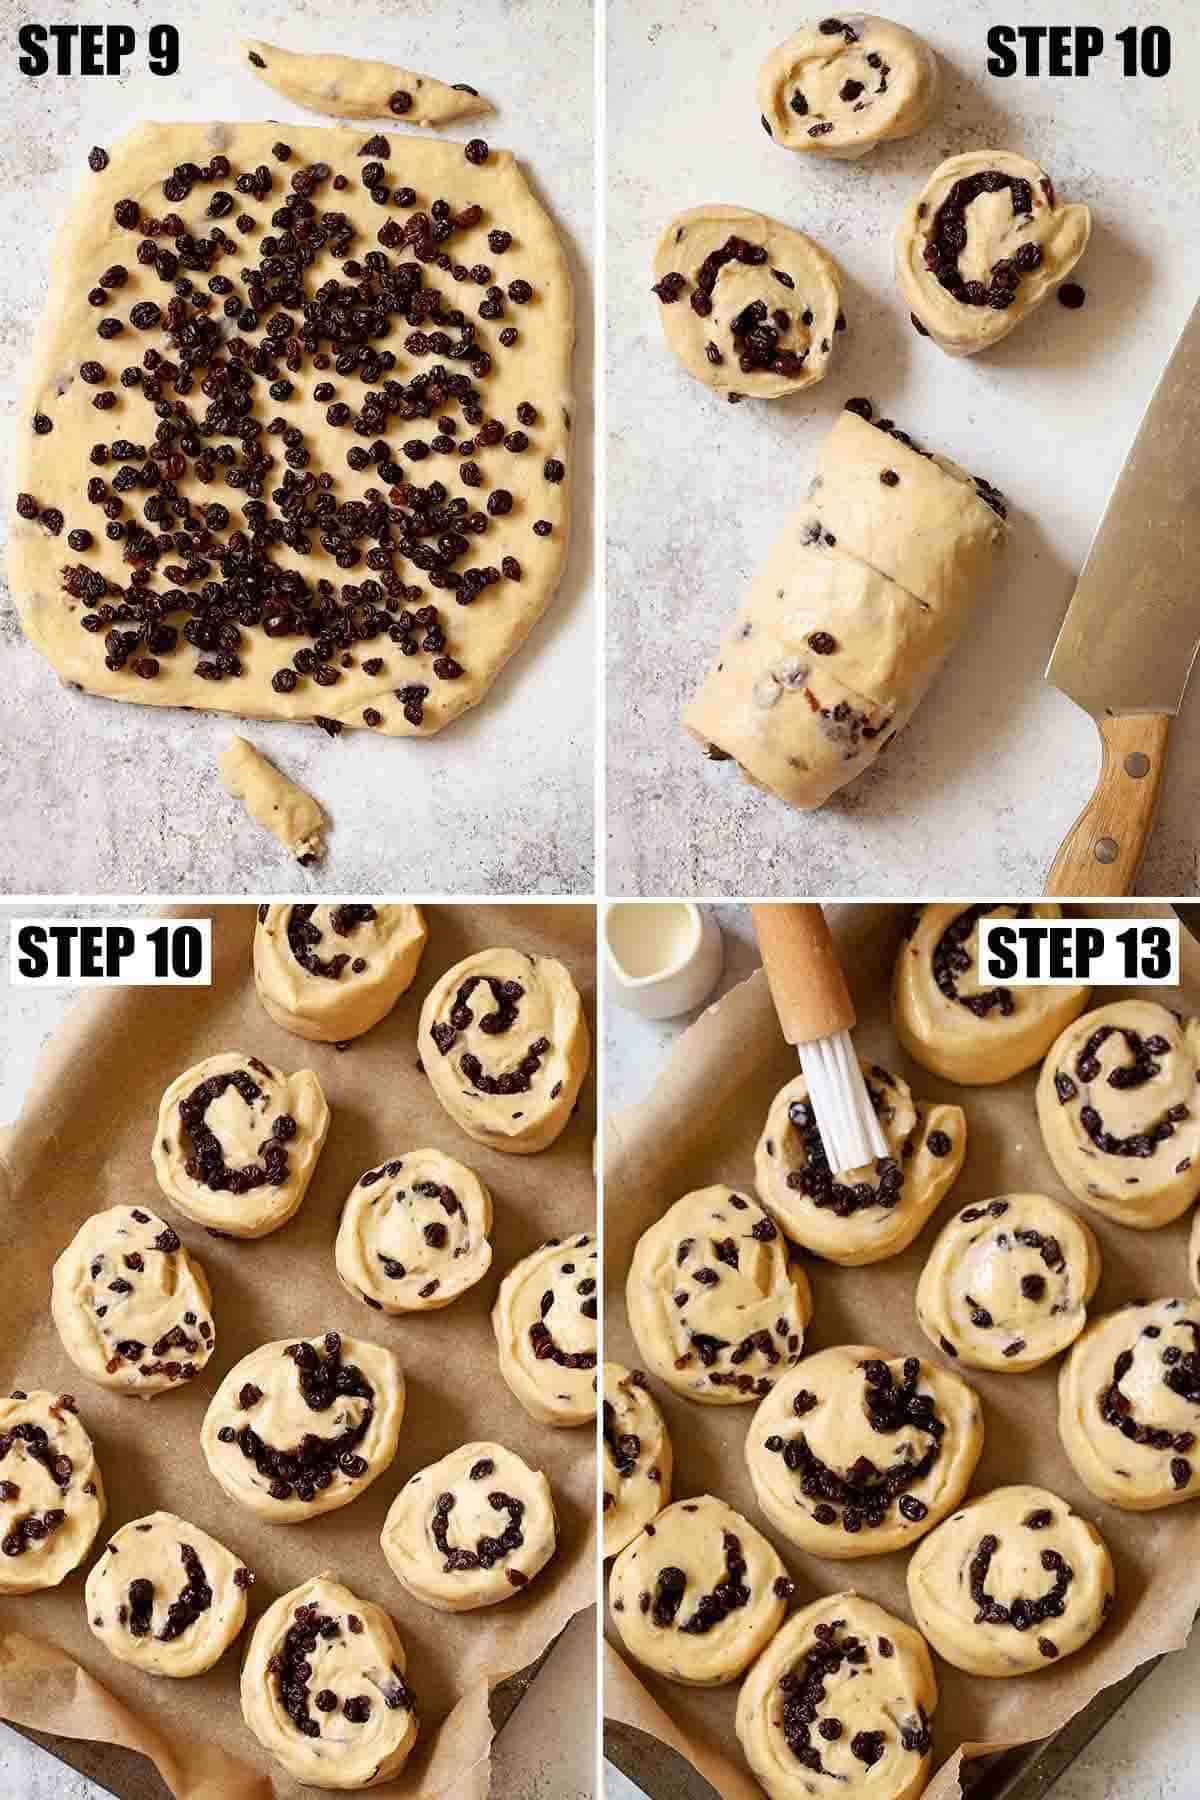 Collage of images showing sweetened bread rolls with dried fruit being rolled and cut.